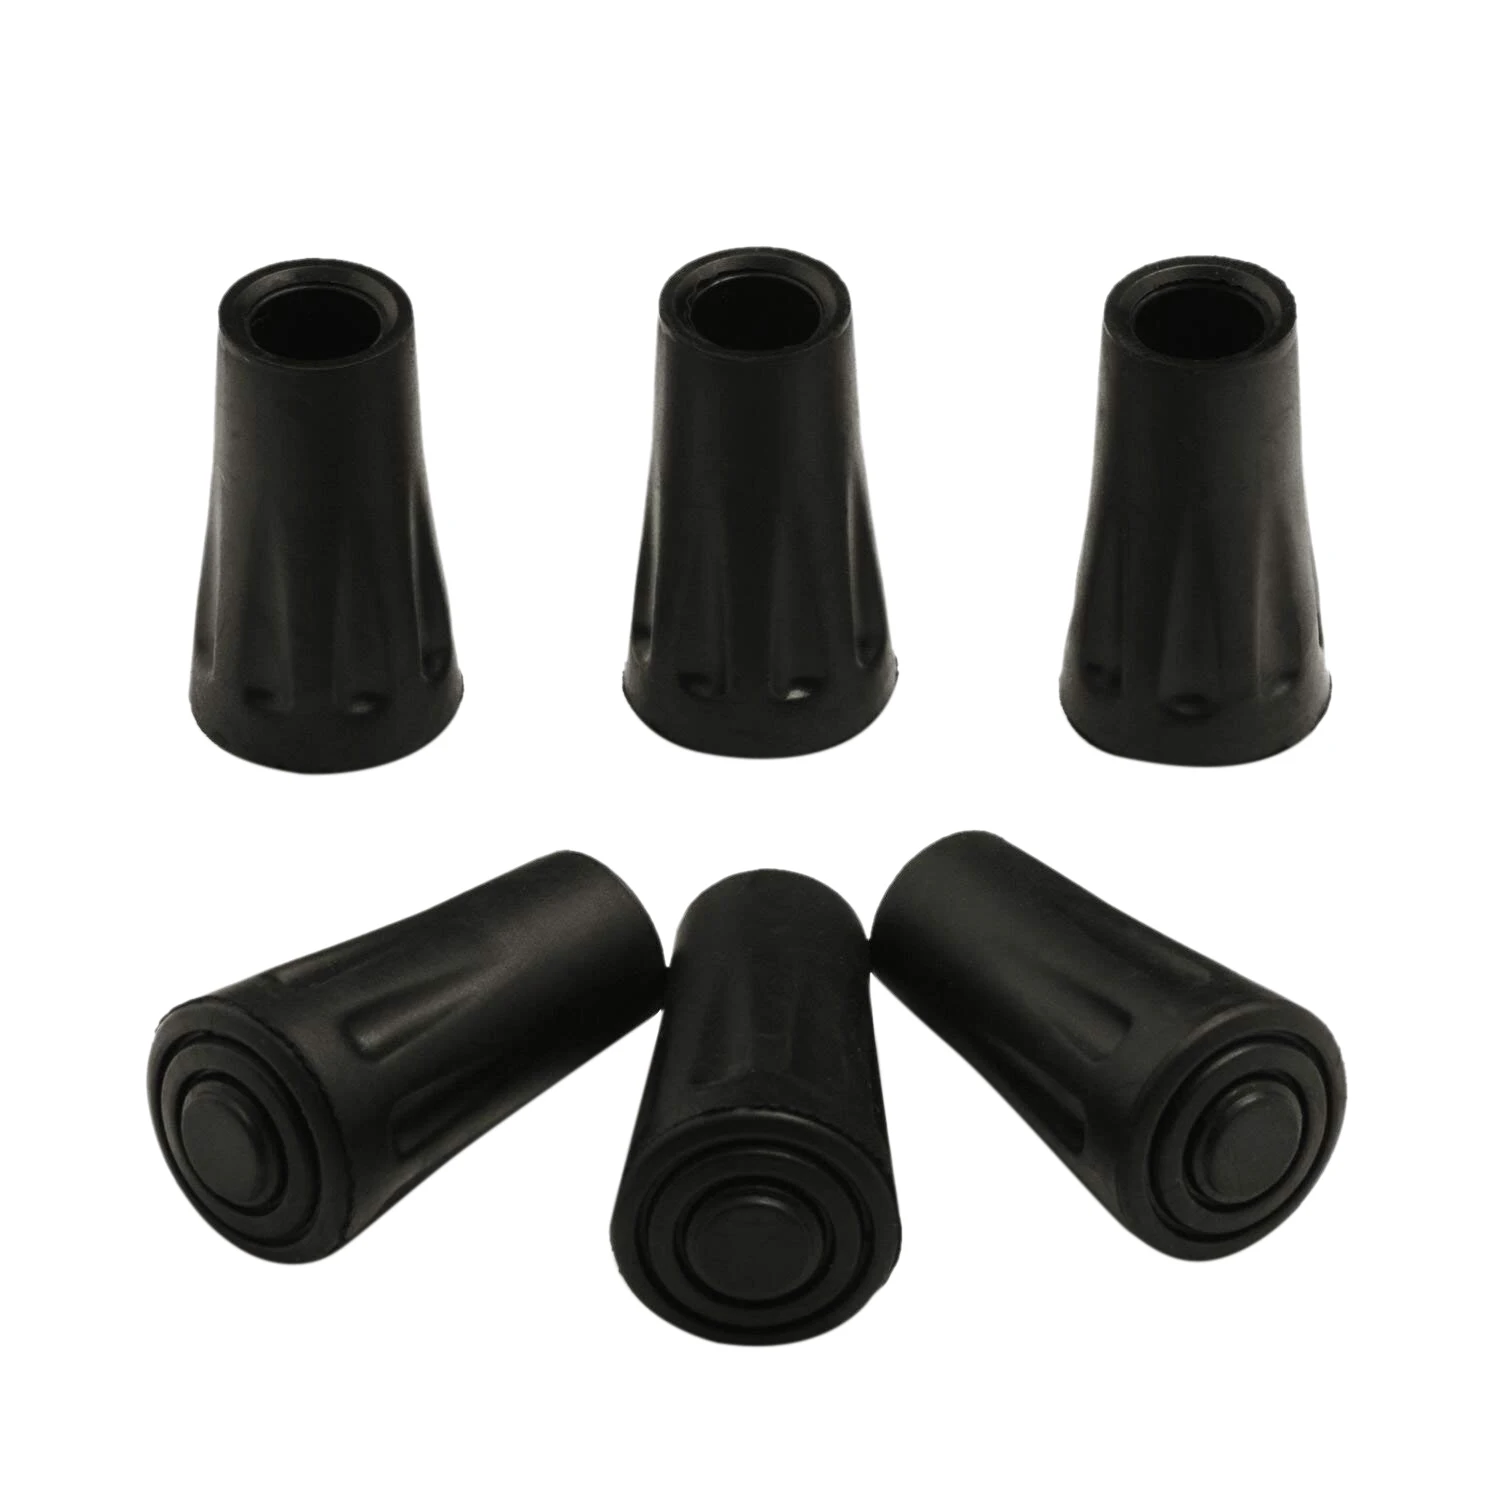 

Extra Hiking Pole Replacement Tips - Pack of 6 - Fits All Standard Hiking, Trekking, Walking Poles